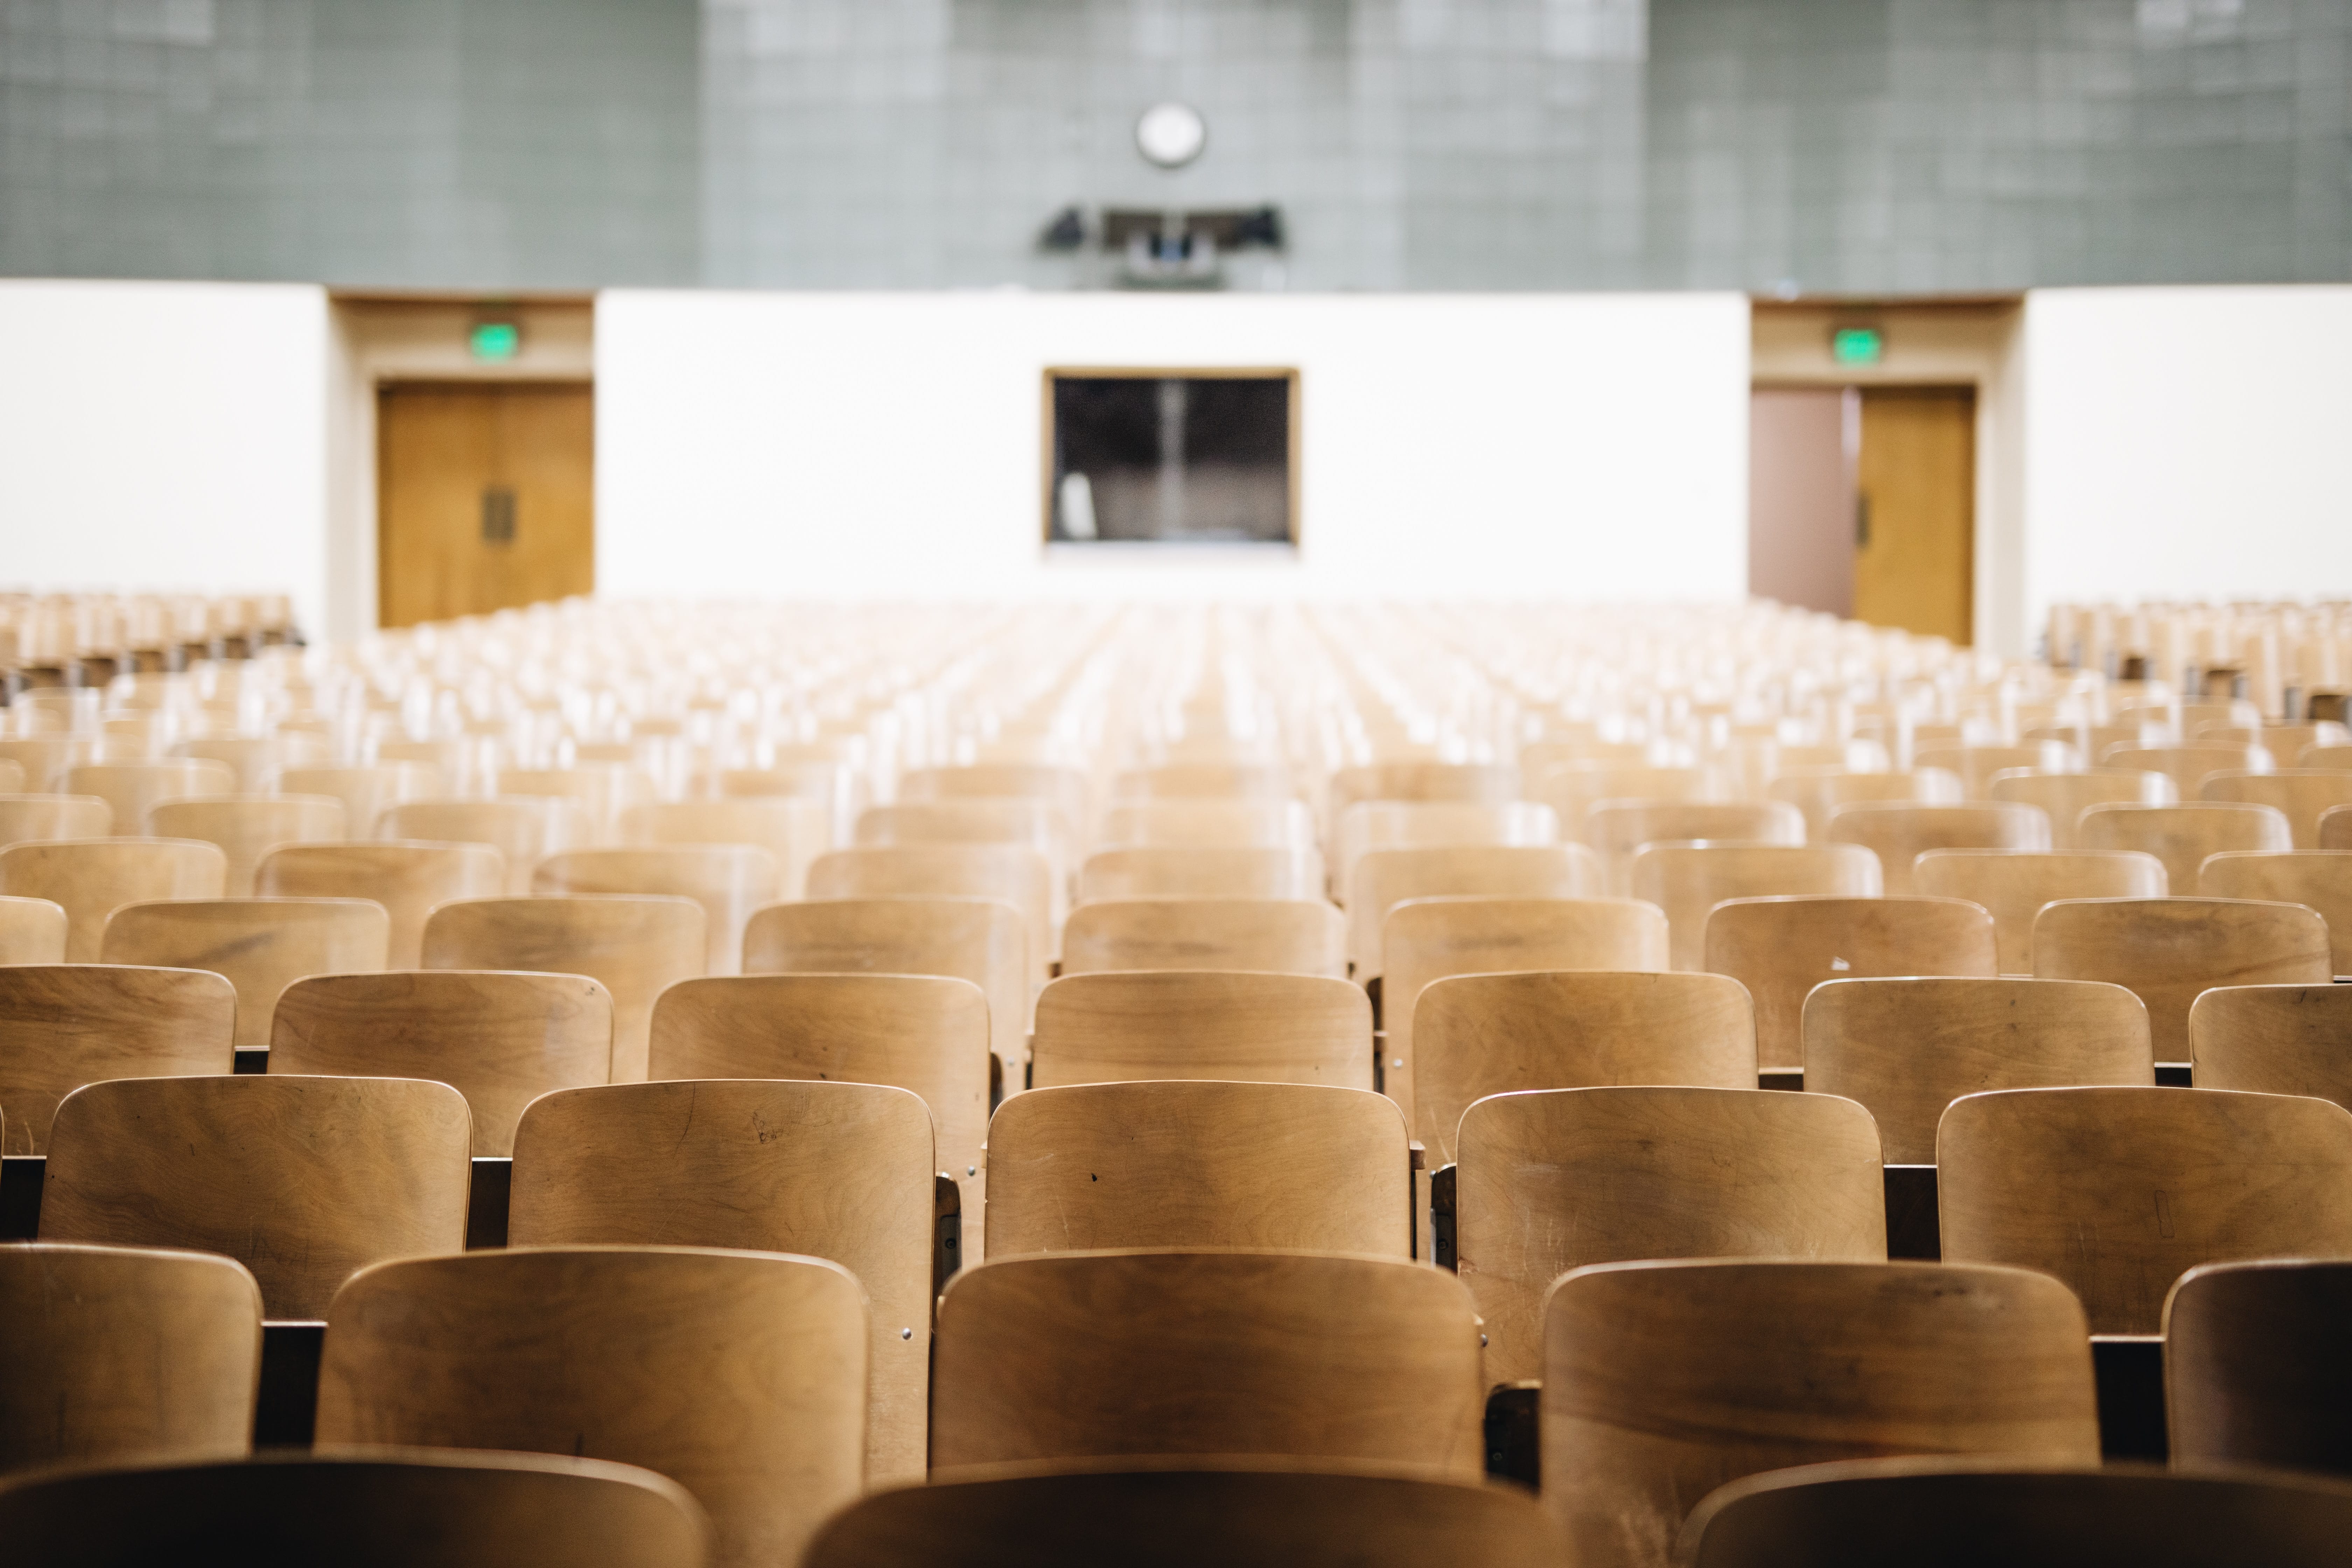 Rows of empty chairs in a classroom; image by Nathan Dumlao, via Unsplash.com.